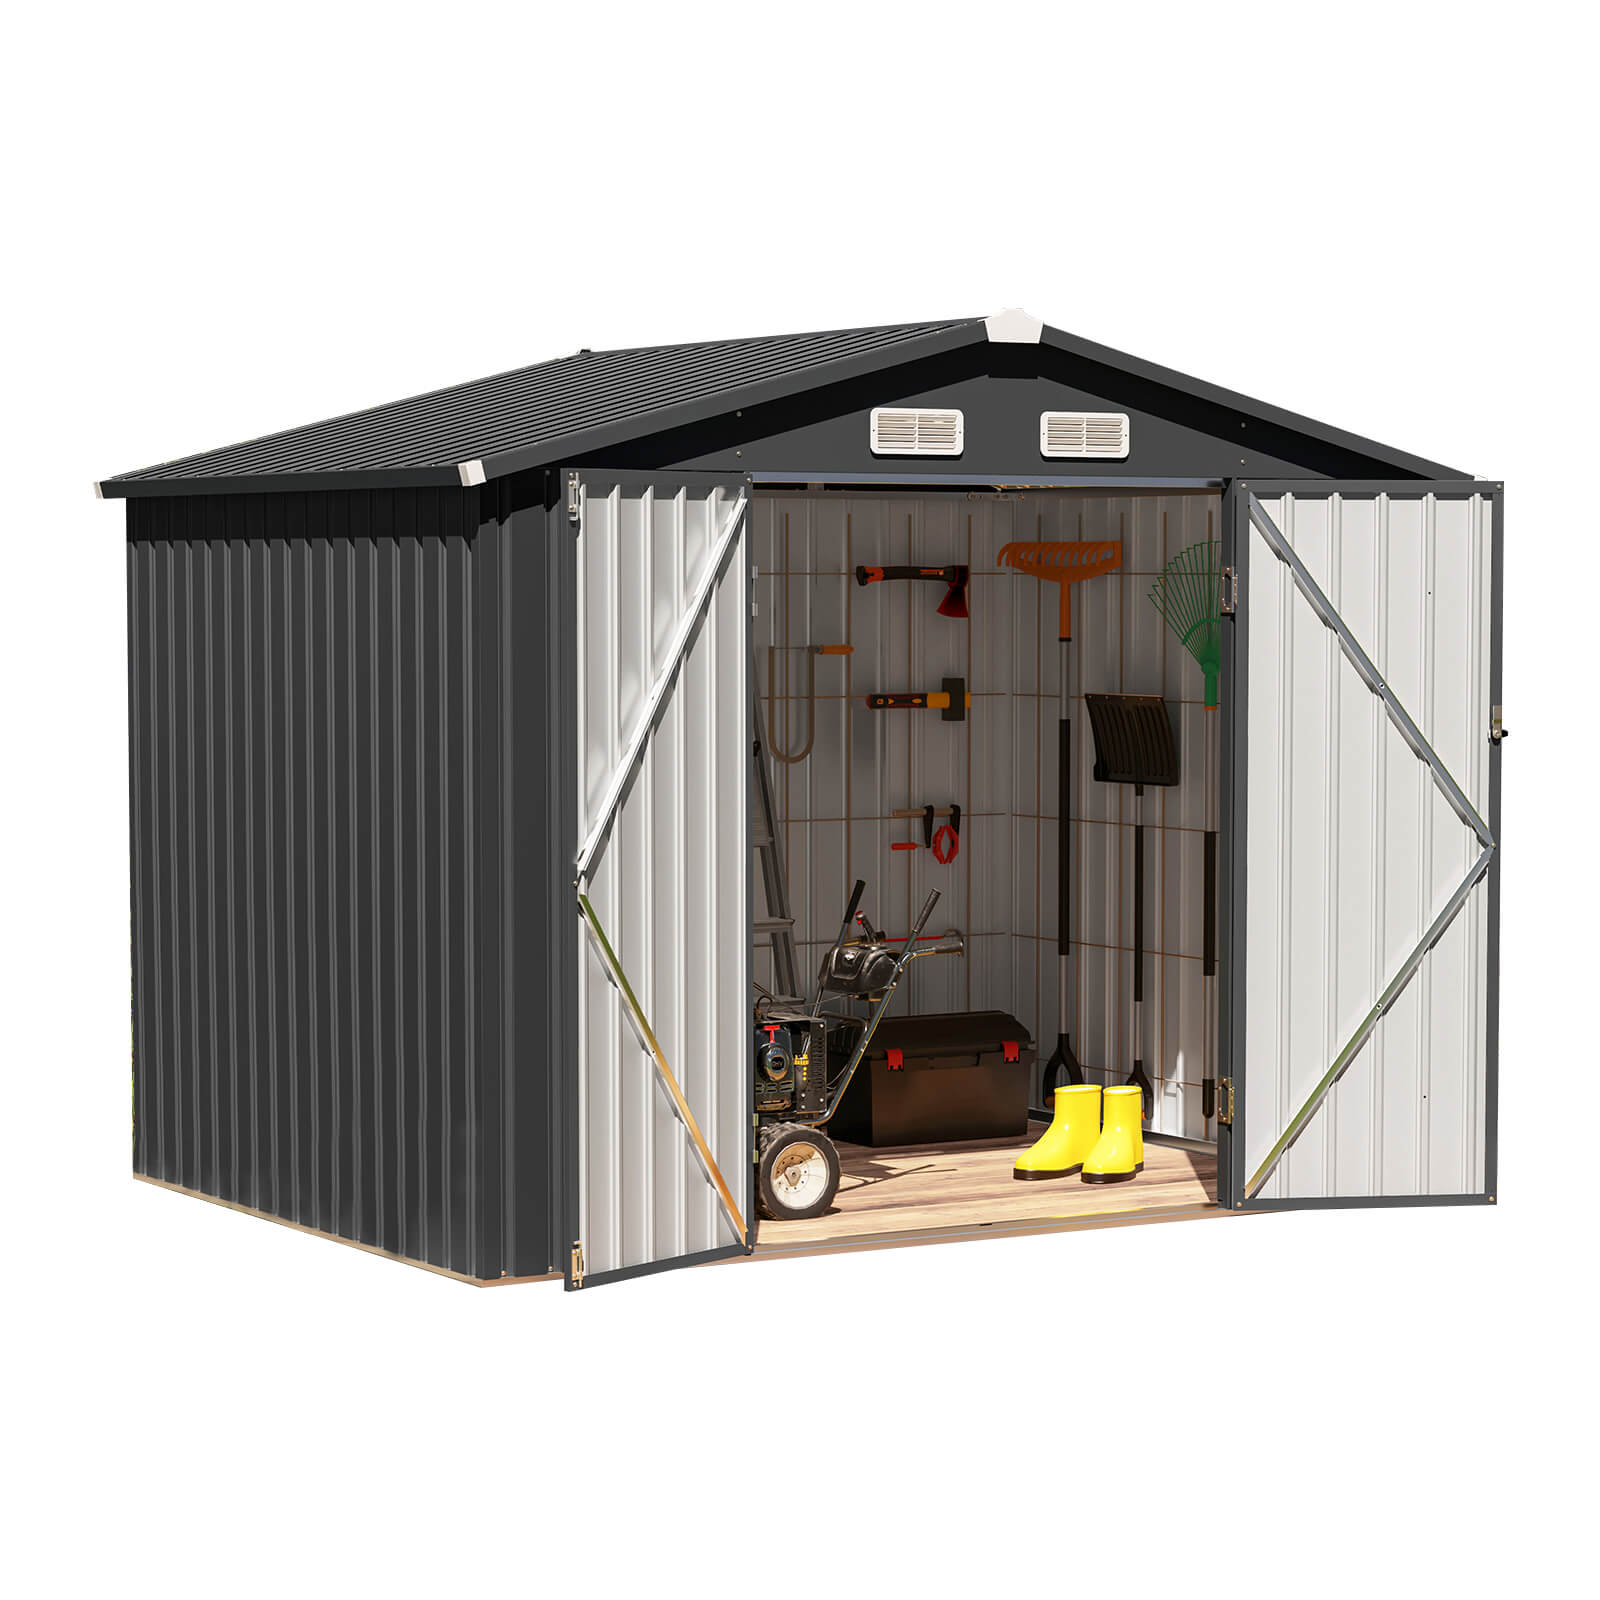 8'x 6' Outdoor Storage Shed Metal Garden Tool Shed for Backyard, Patio, Lawn, Black | Orange-Casual